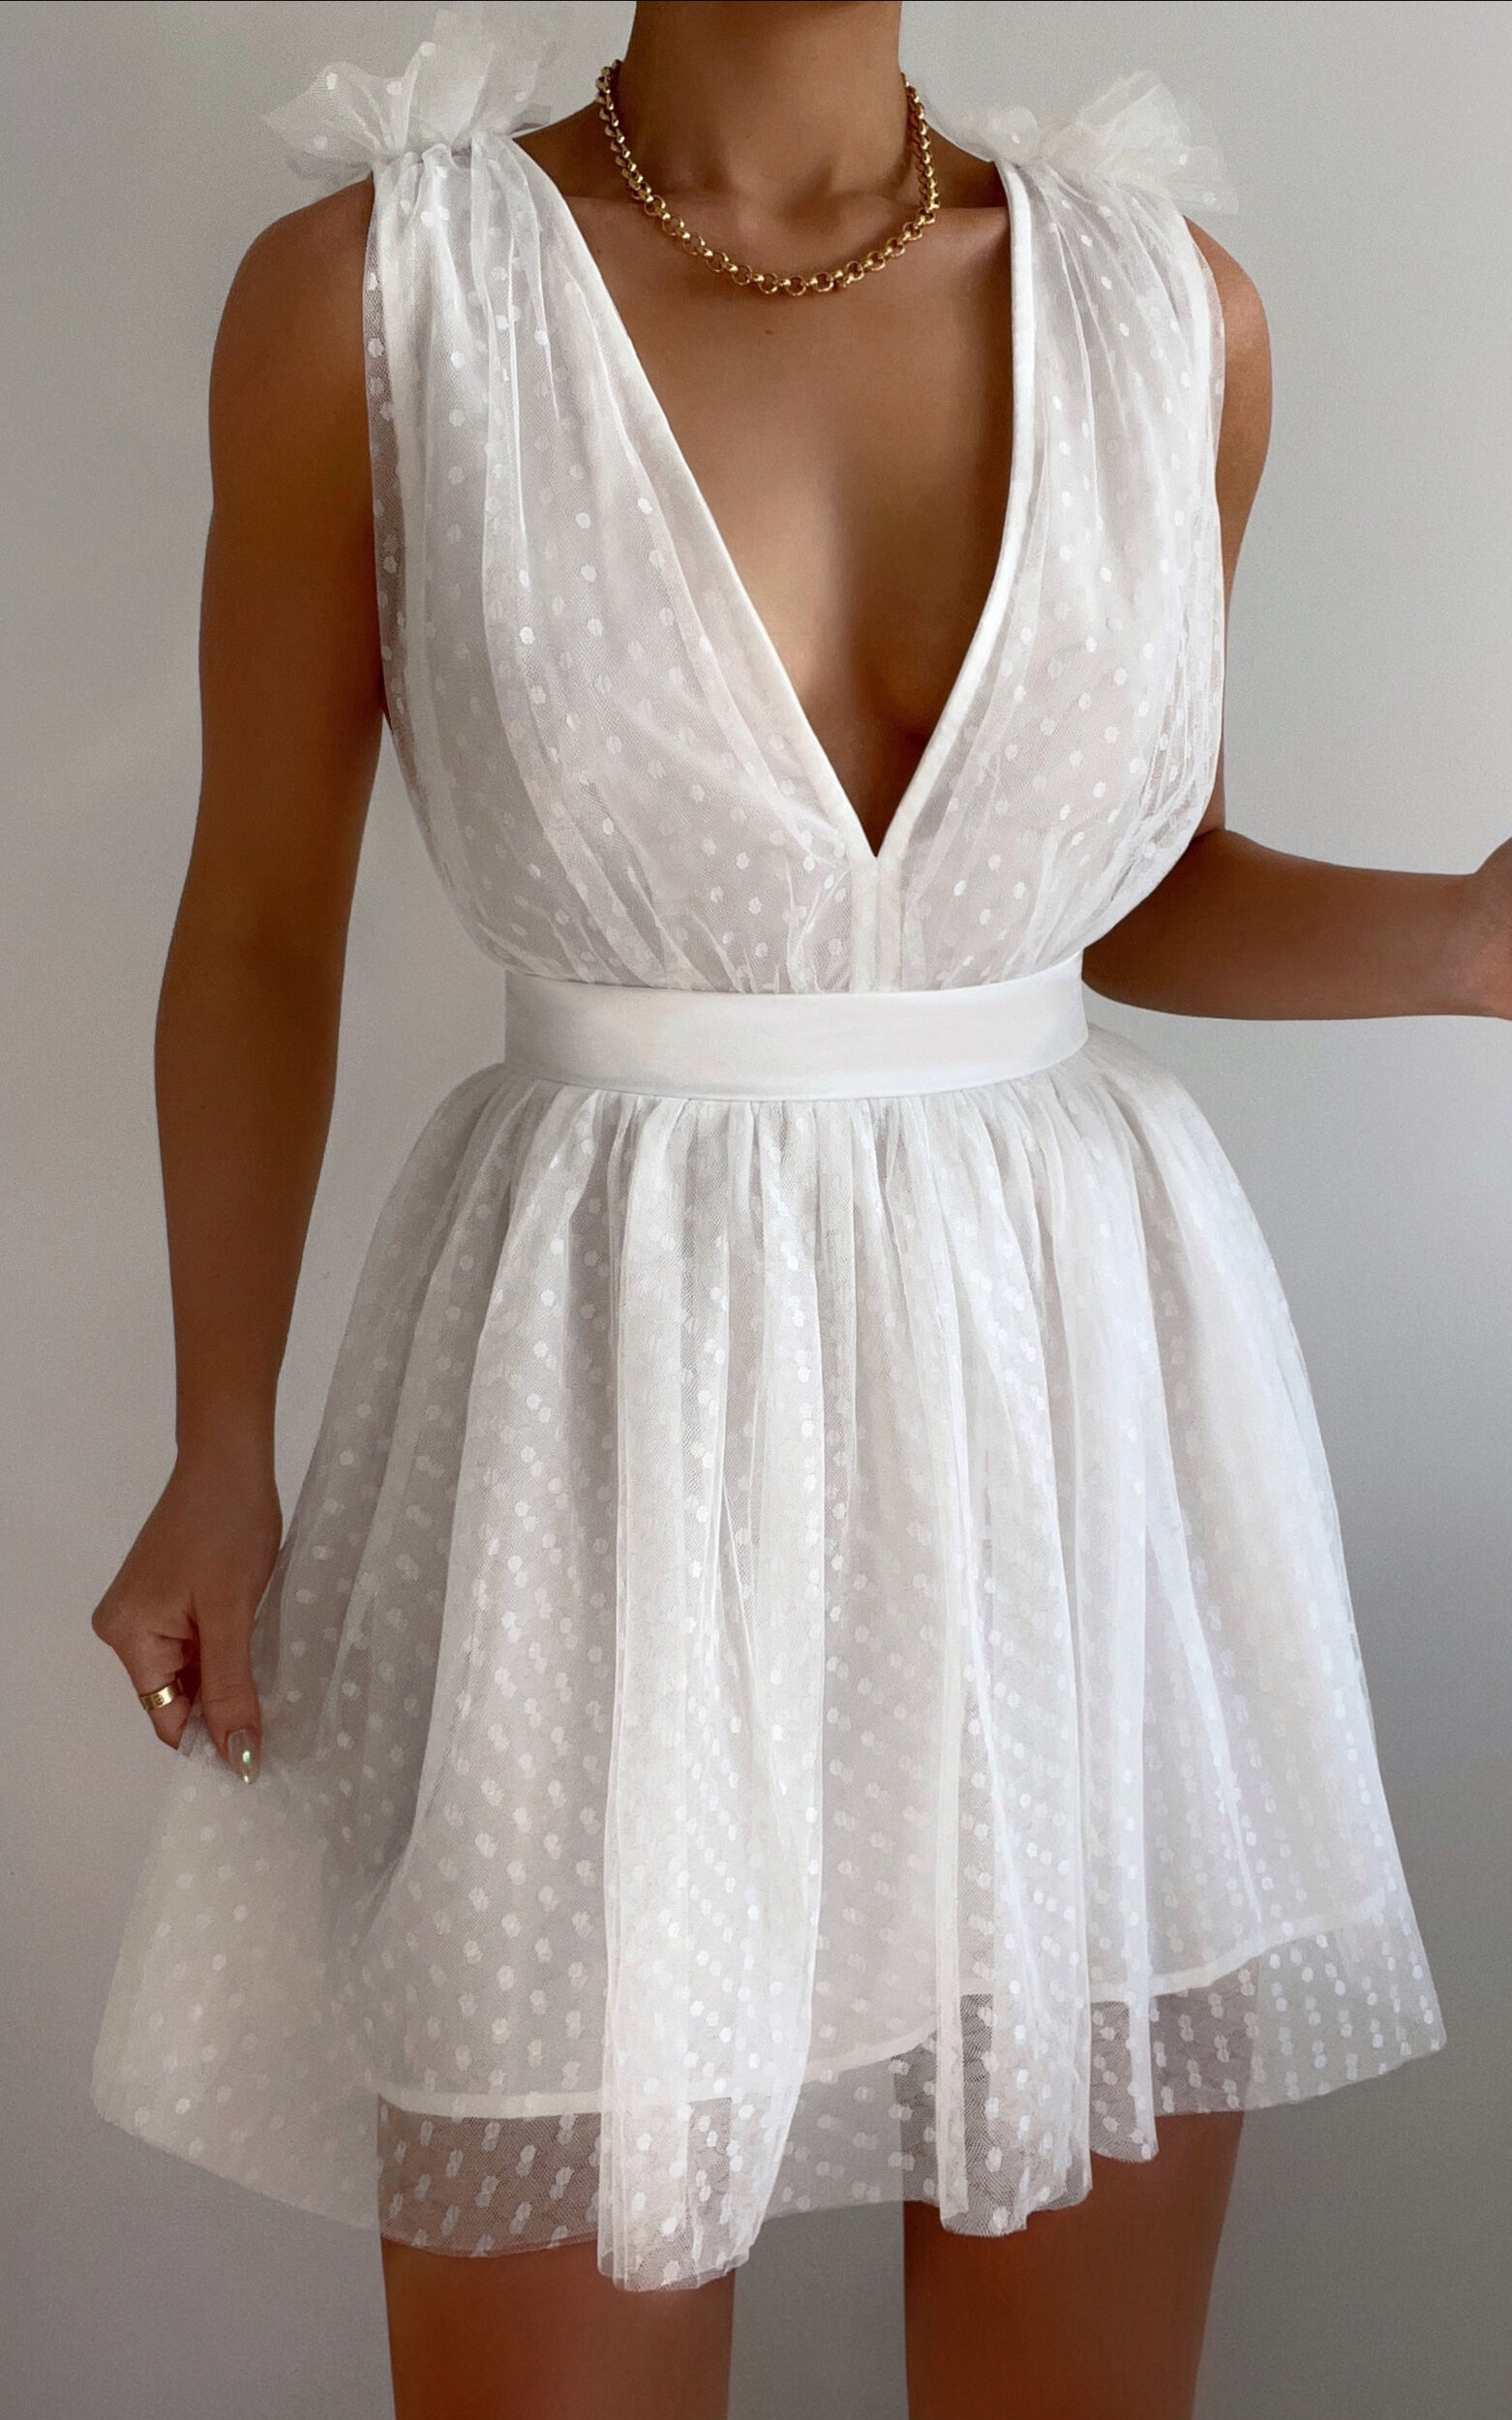 Mariabella Mini Dress - Tulle Plunge Dress in White - 04, WHT4, super-hi-res image number null